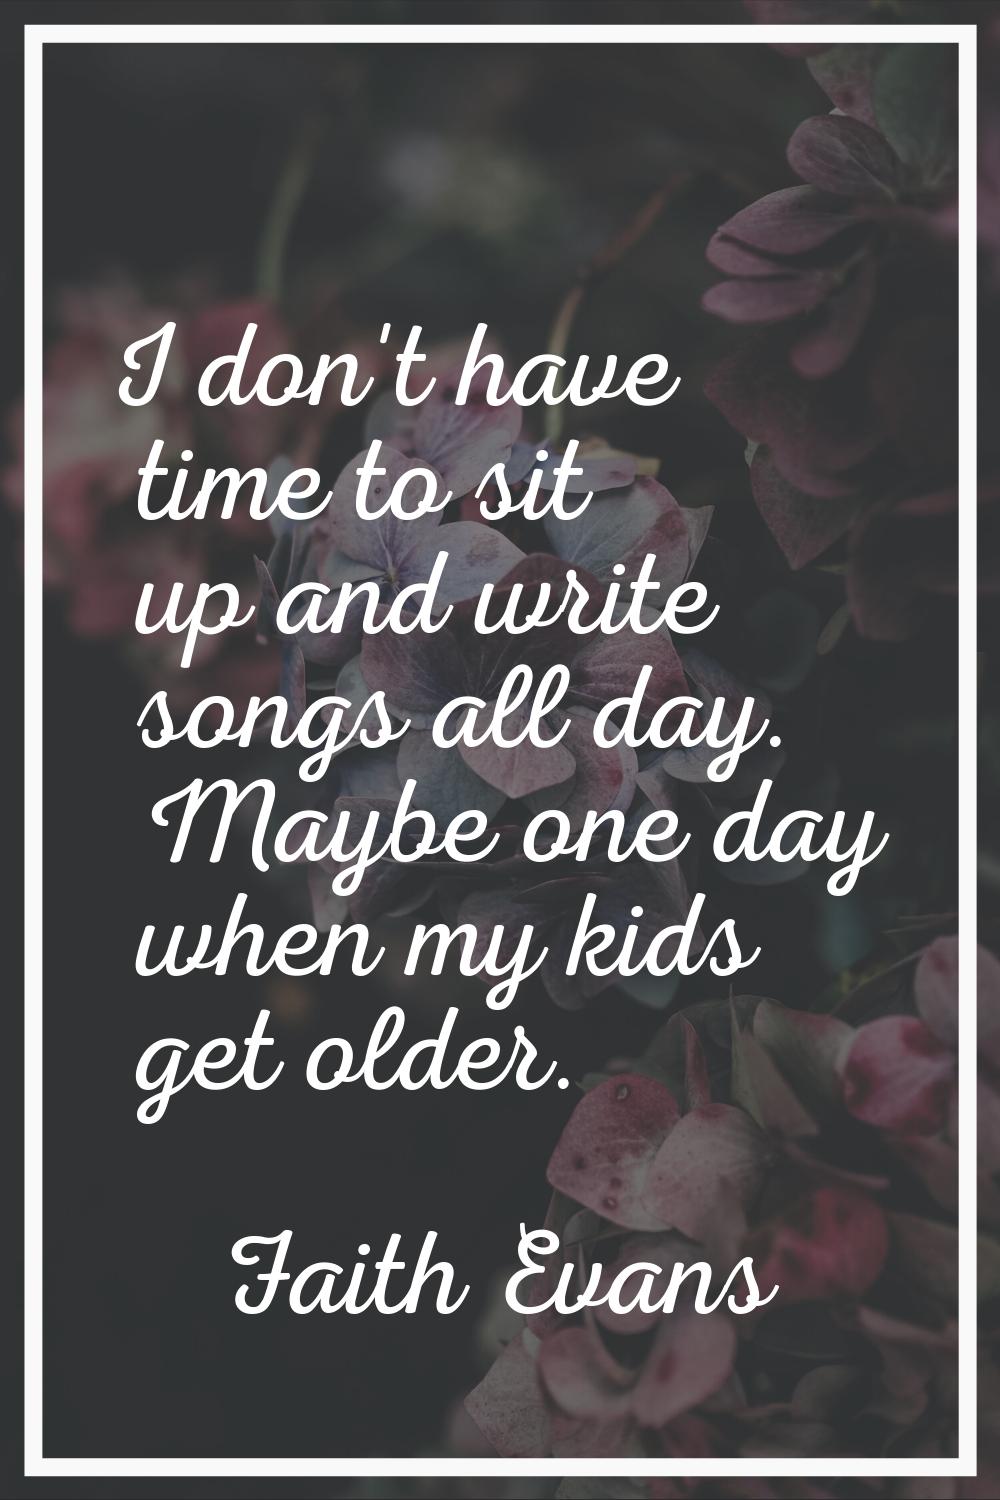 I don't have time to sit up and write songs all day. Maybe one day when my kids get older.